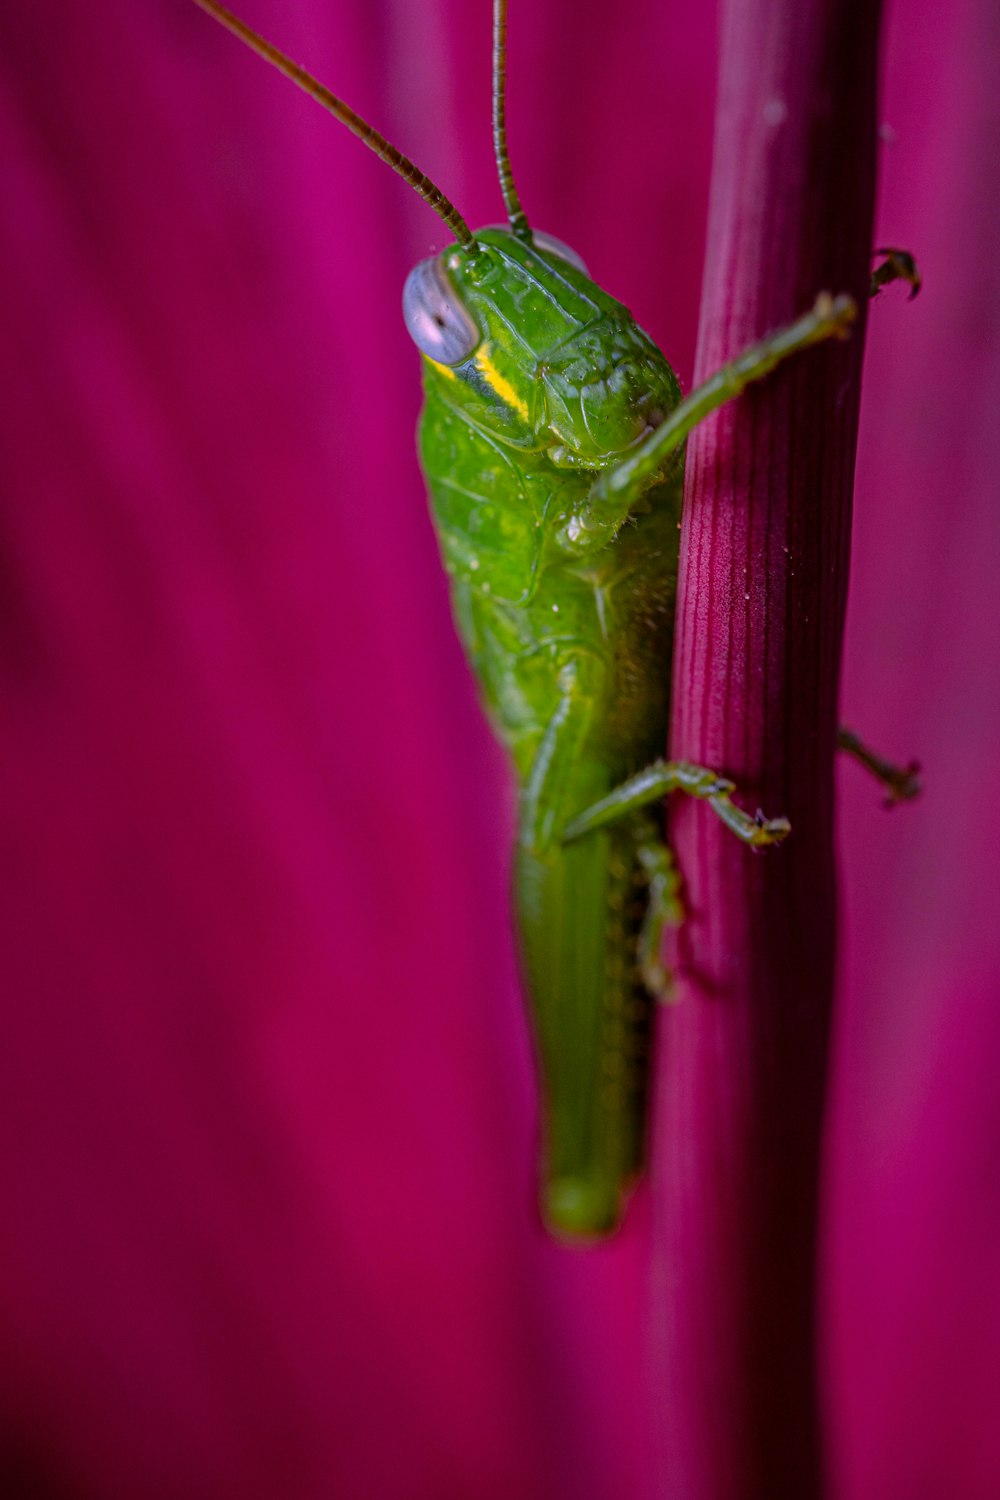 a green insect on a red surface